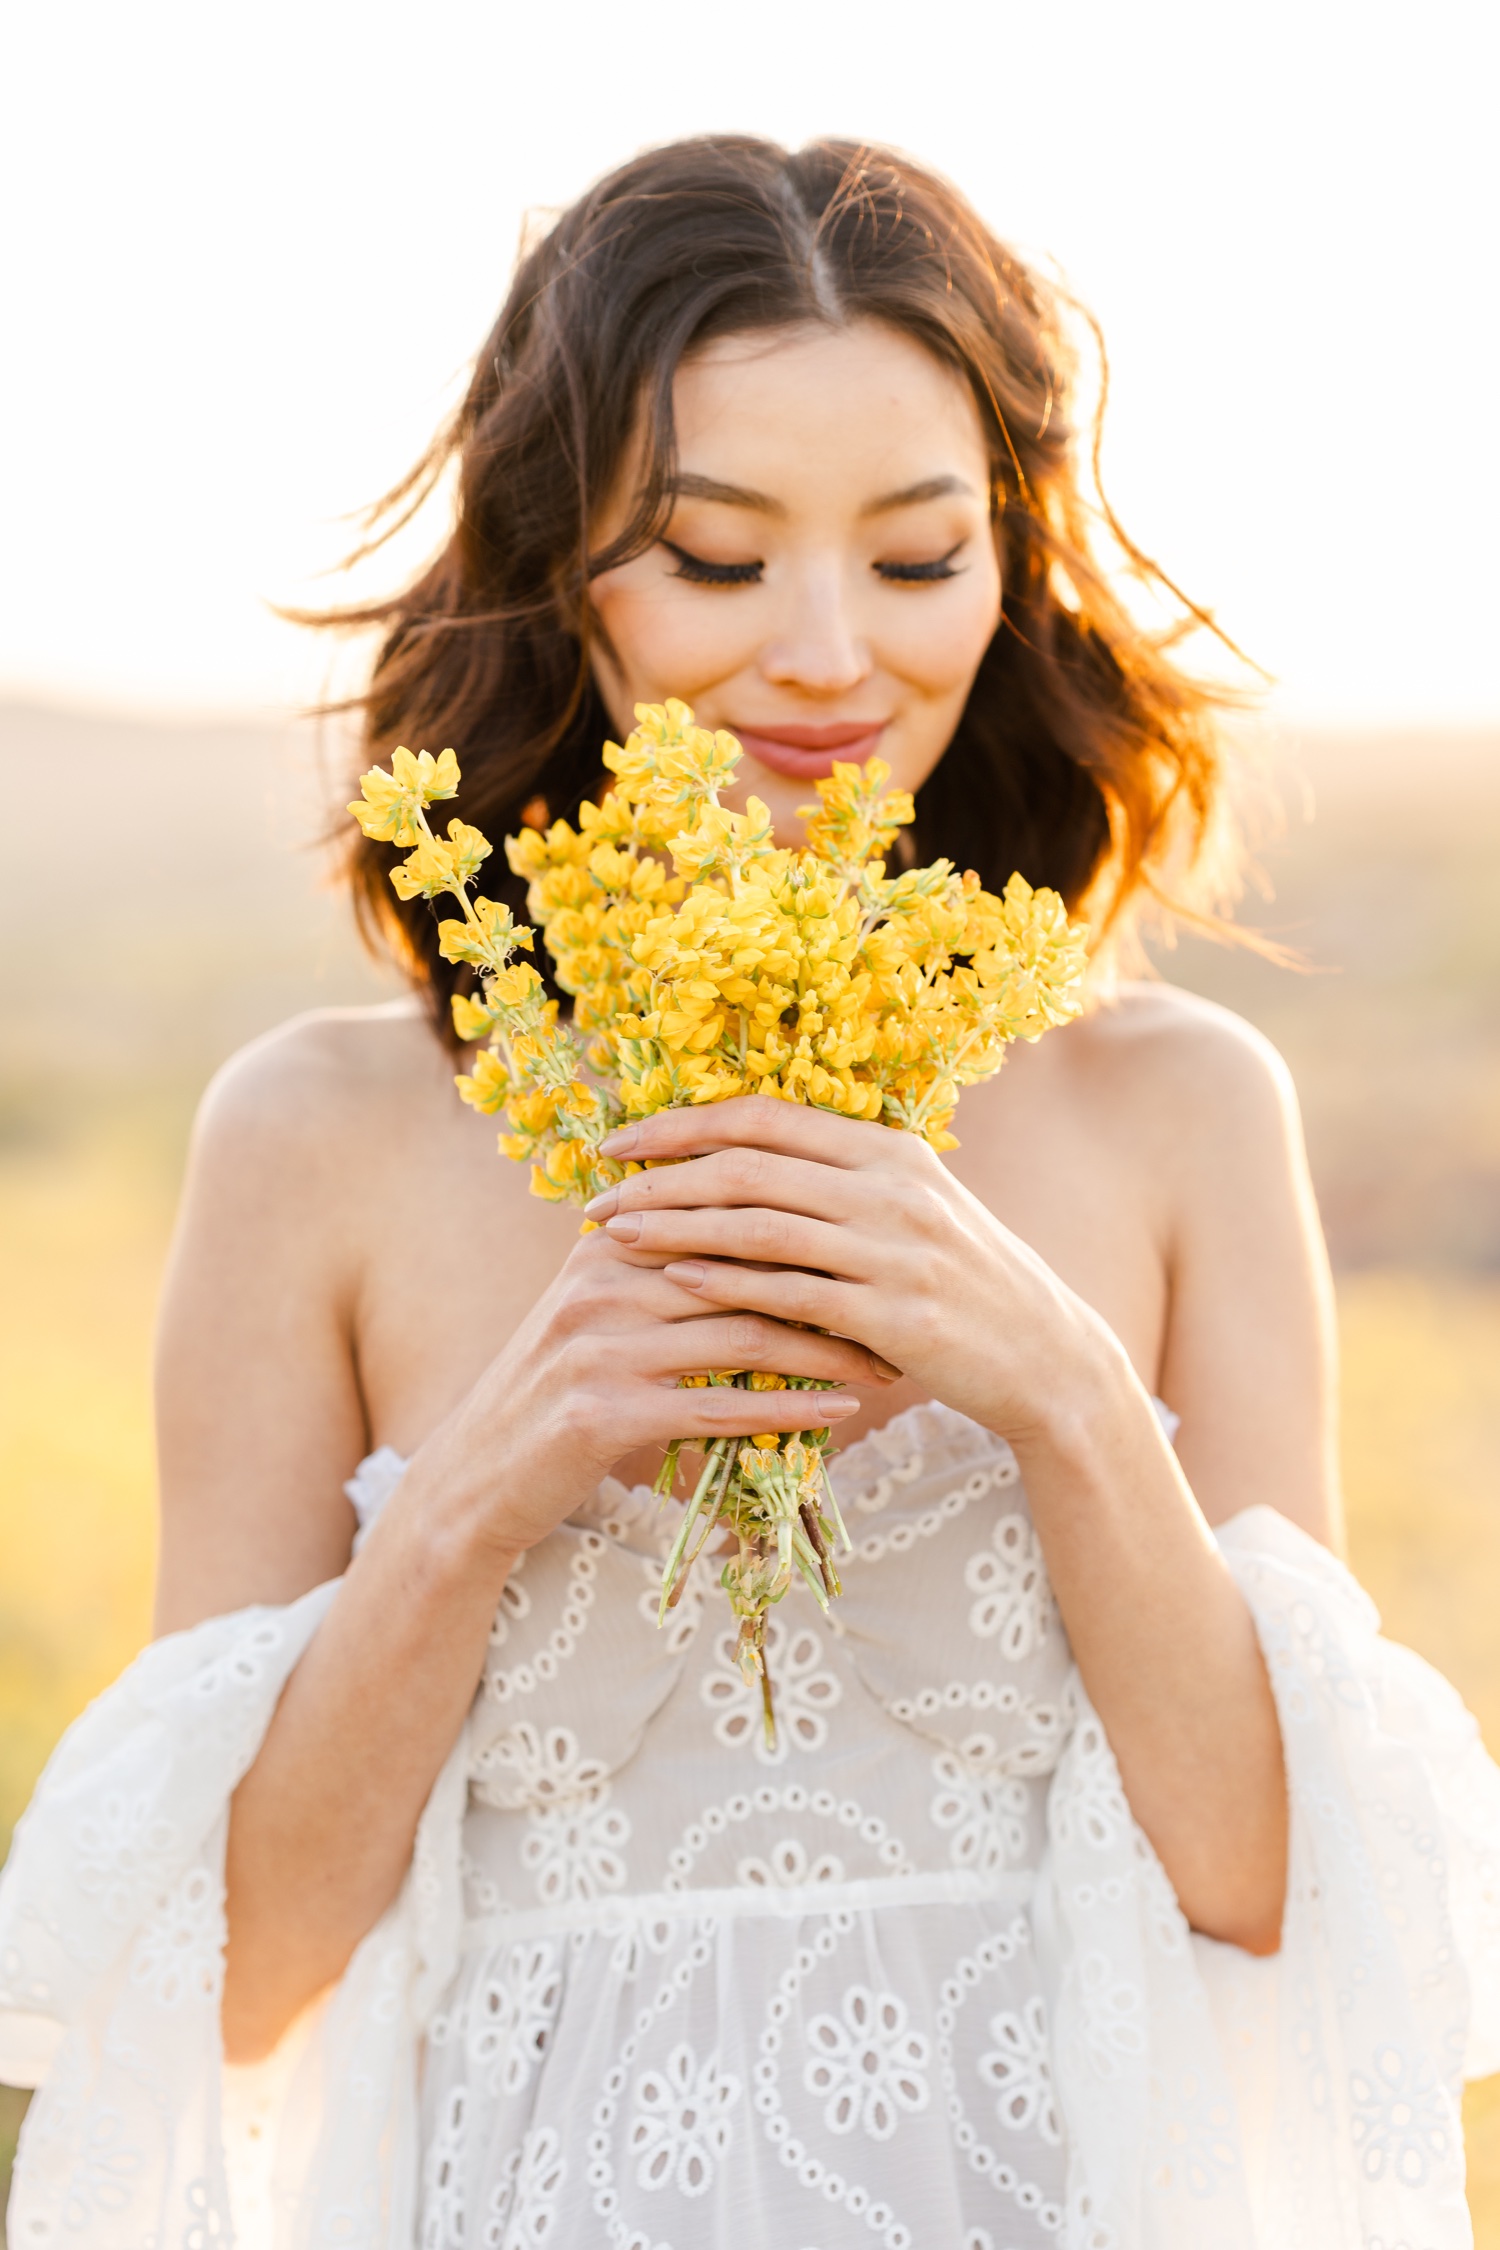 Smiling Girl Posing With Colorful Flower Bouquet Stock Photo, Picture and  Royalty Free Image. Image 138609919.